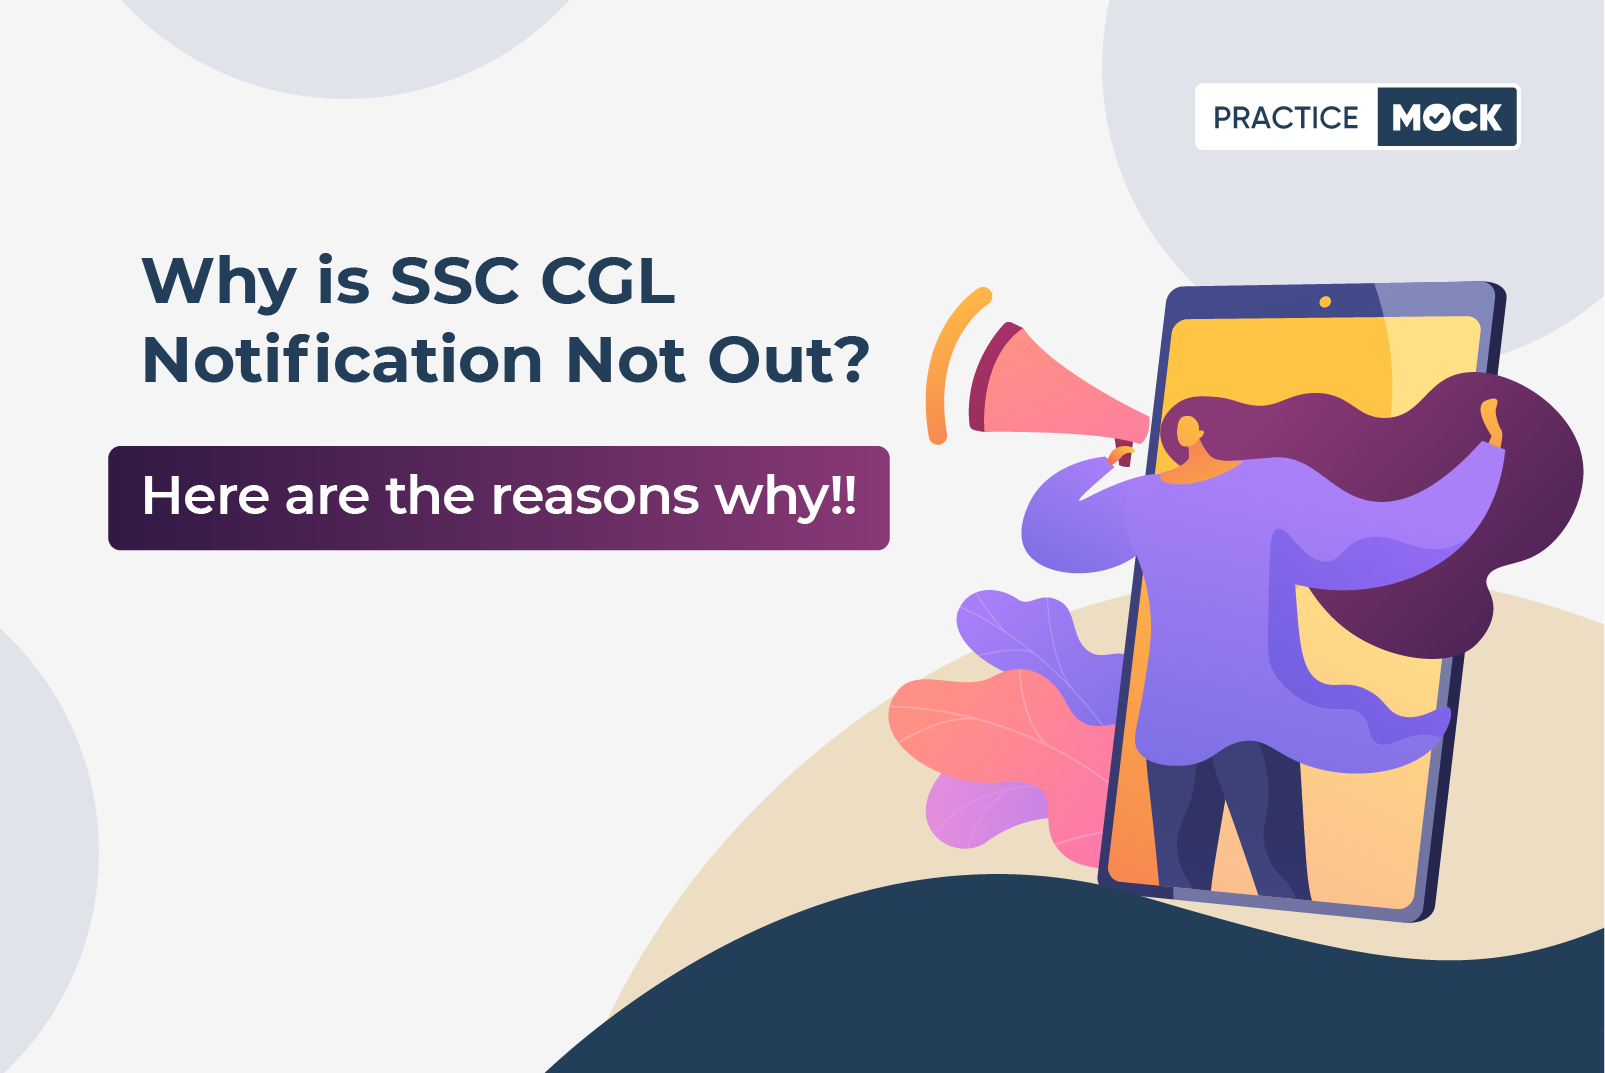 SSC CGL expected notification 2022